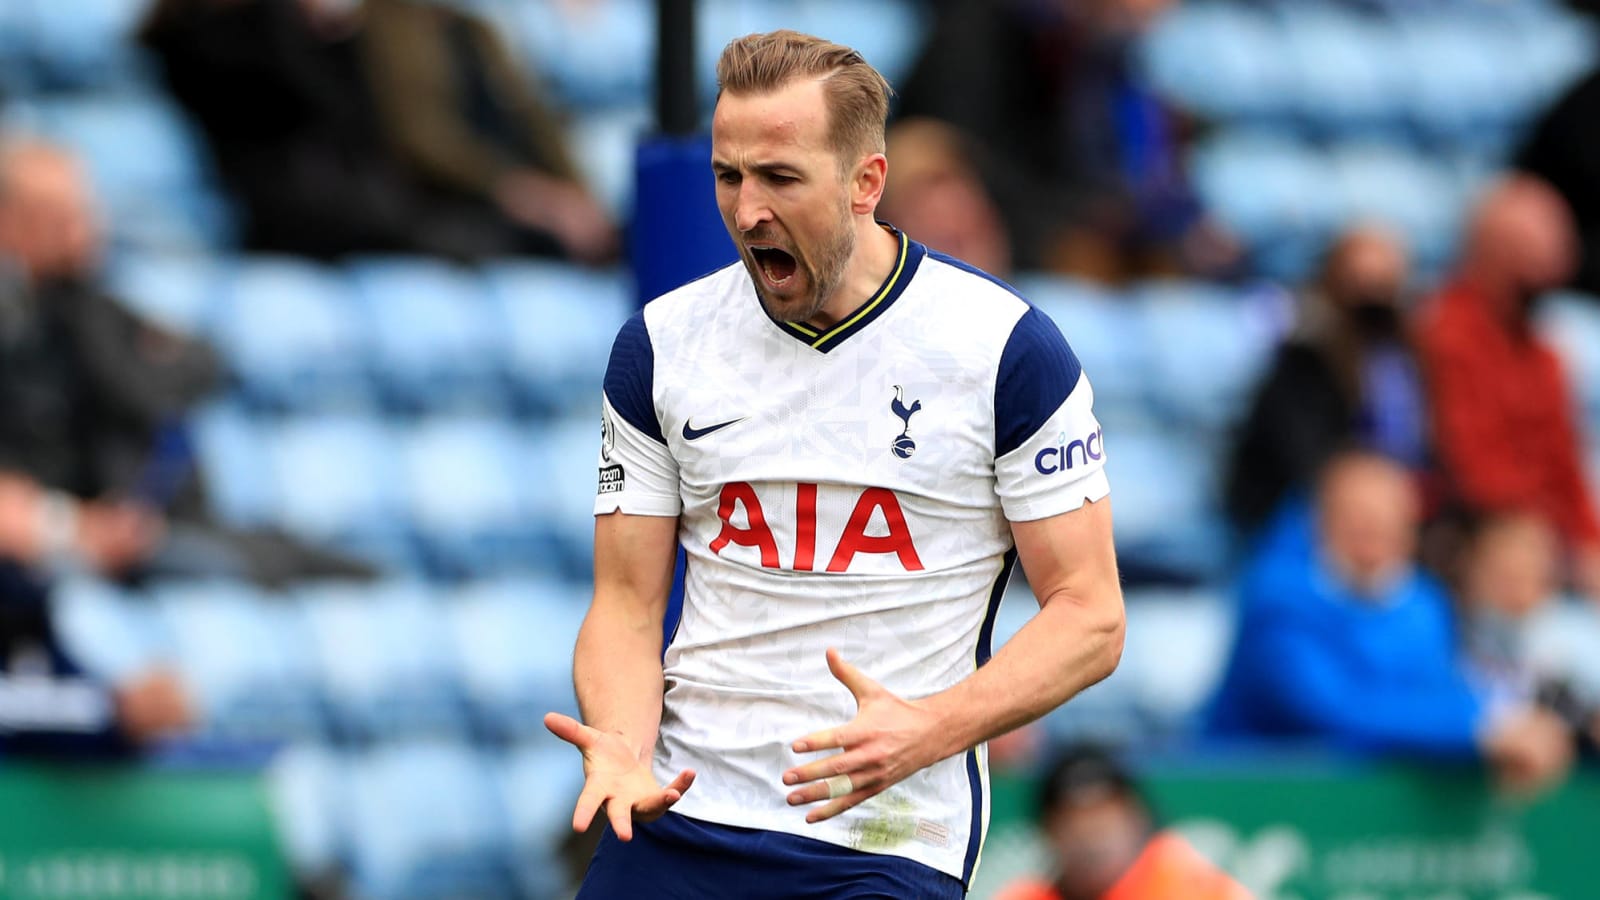 Guardiola confirms Man City's interest in signing Harry Kane